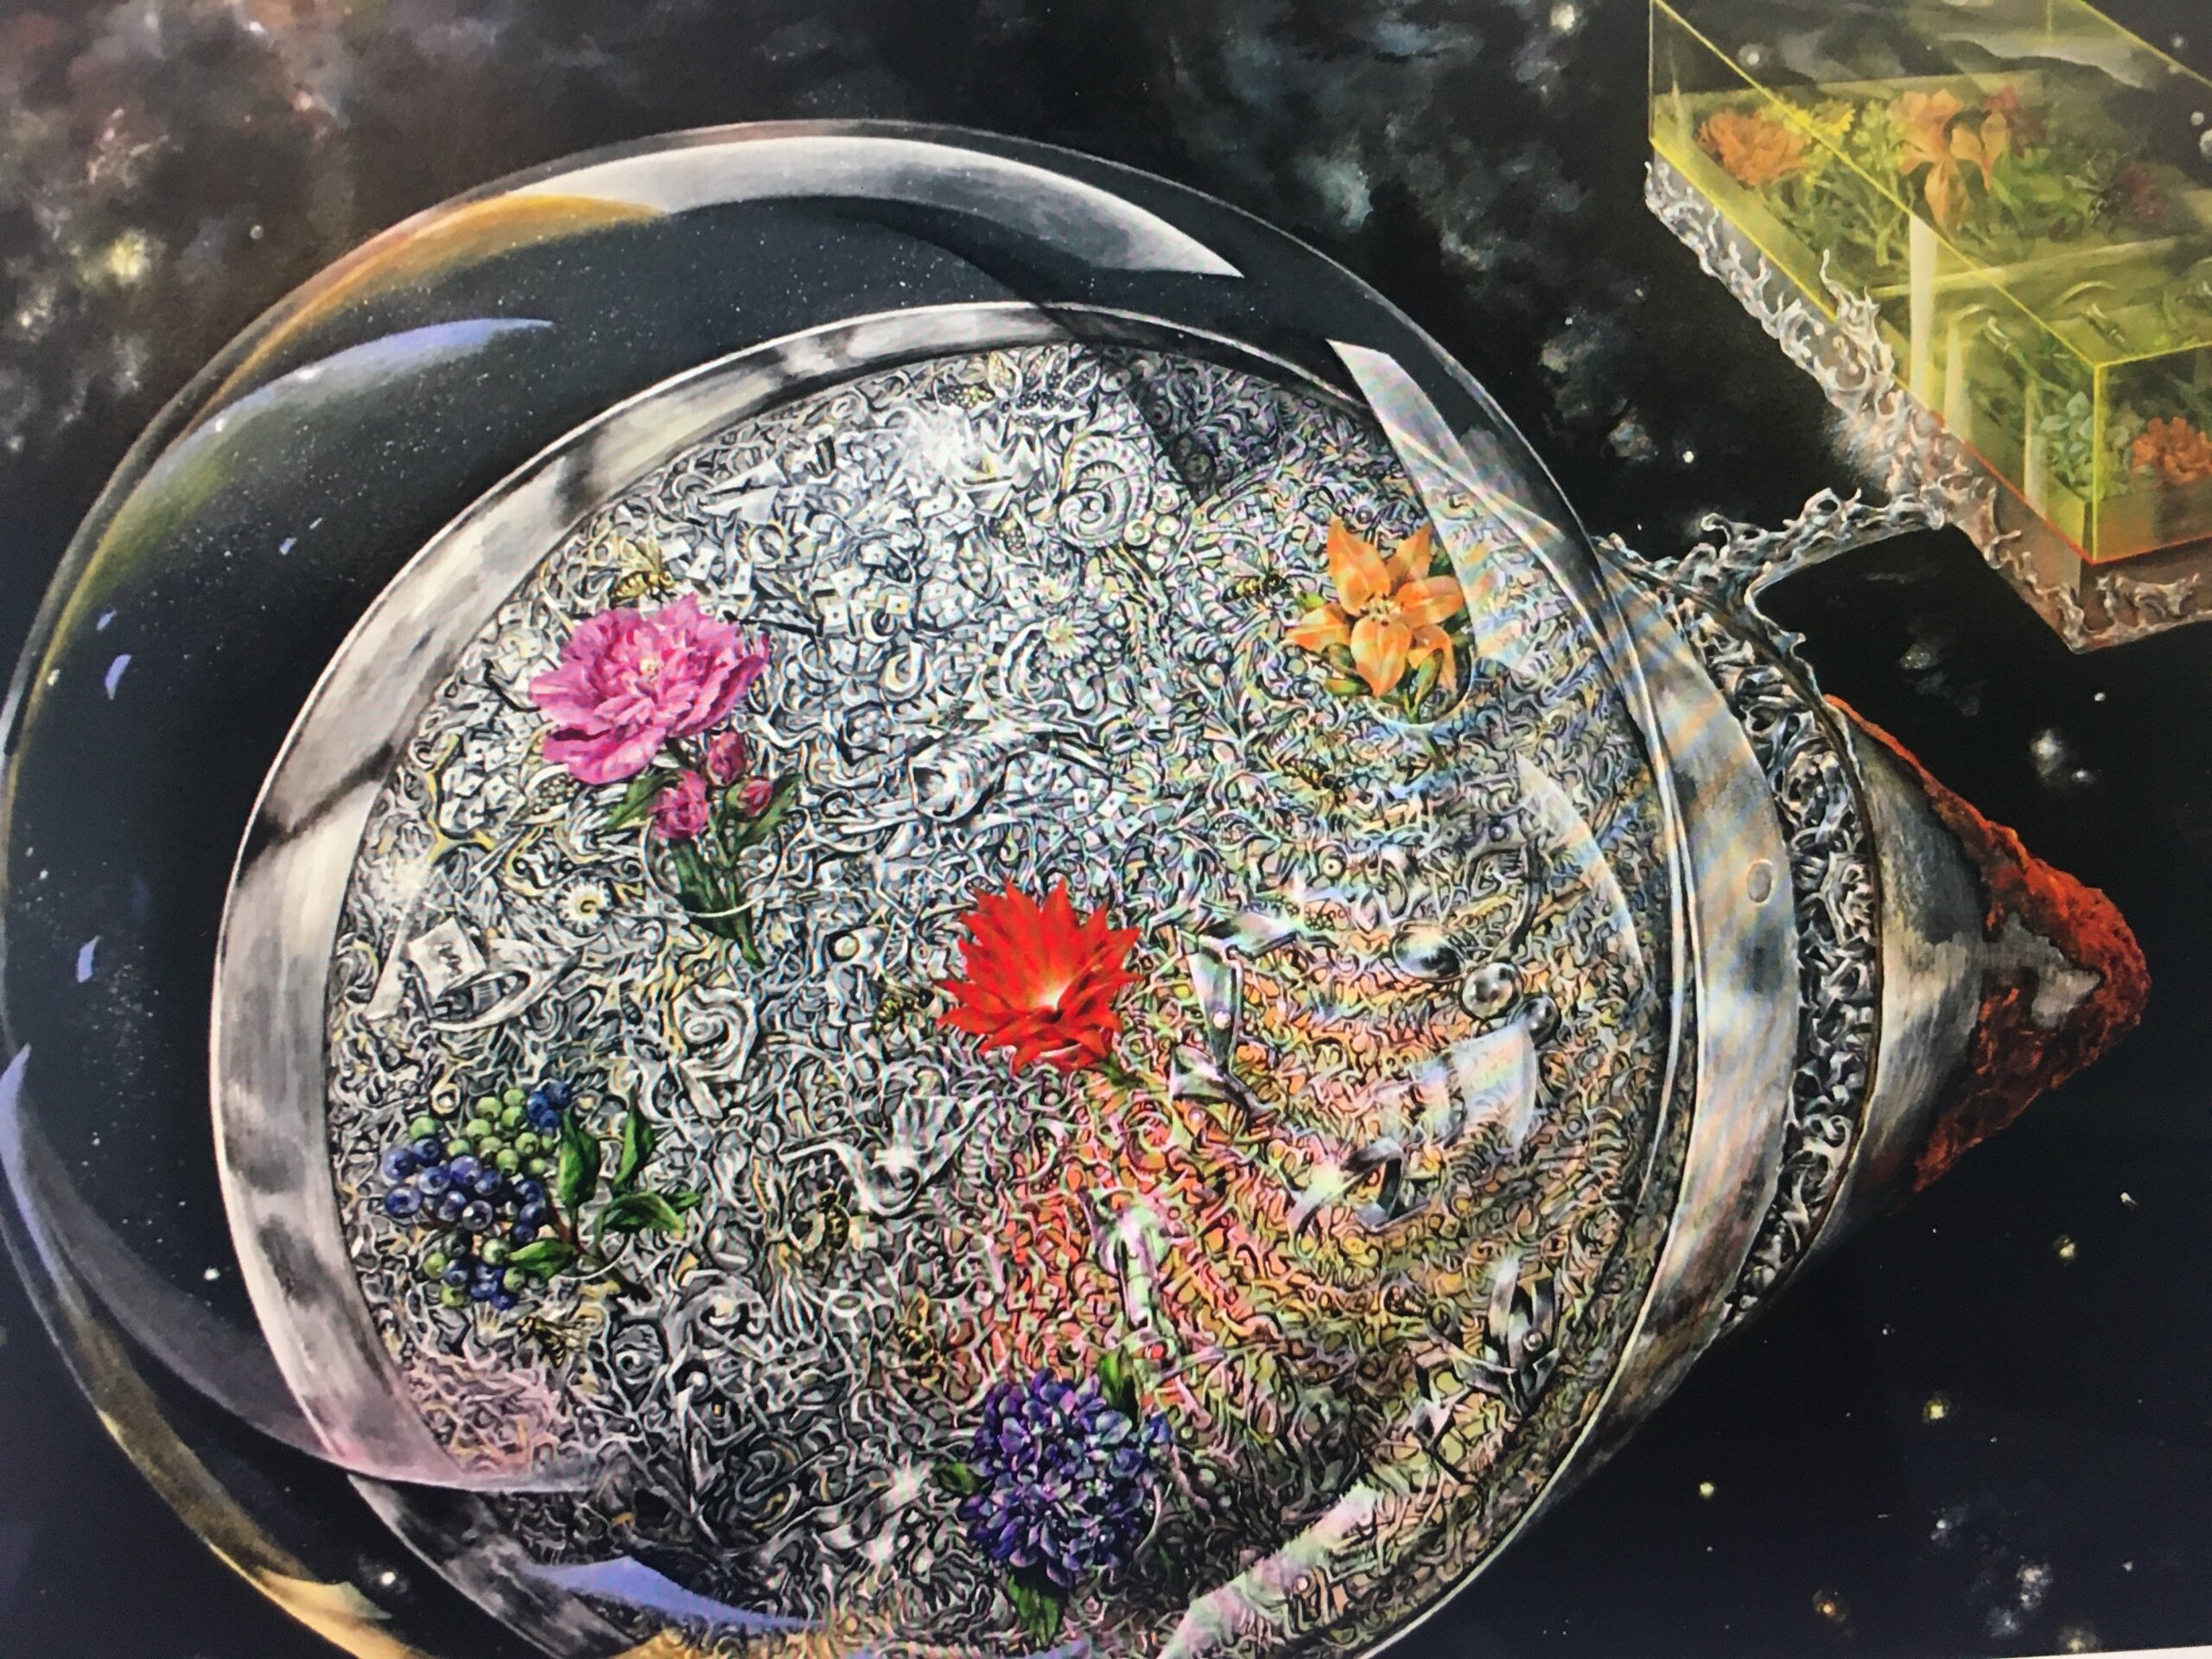 Anna Jurinich's "Earthly Flowers and Alien Silver" (acrylic, 25" x 34")